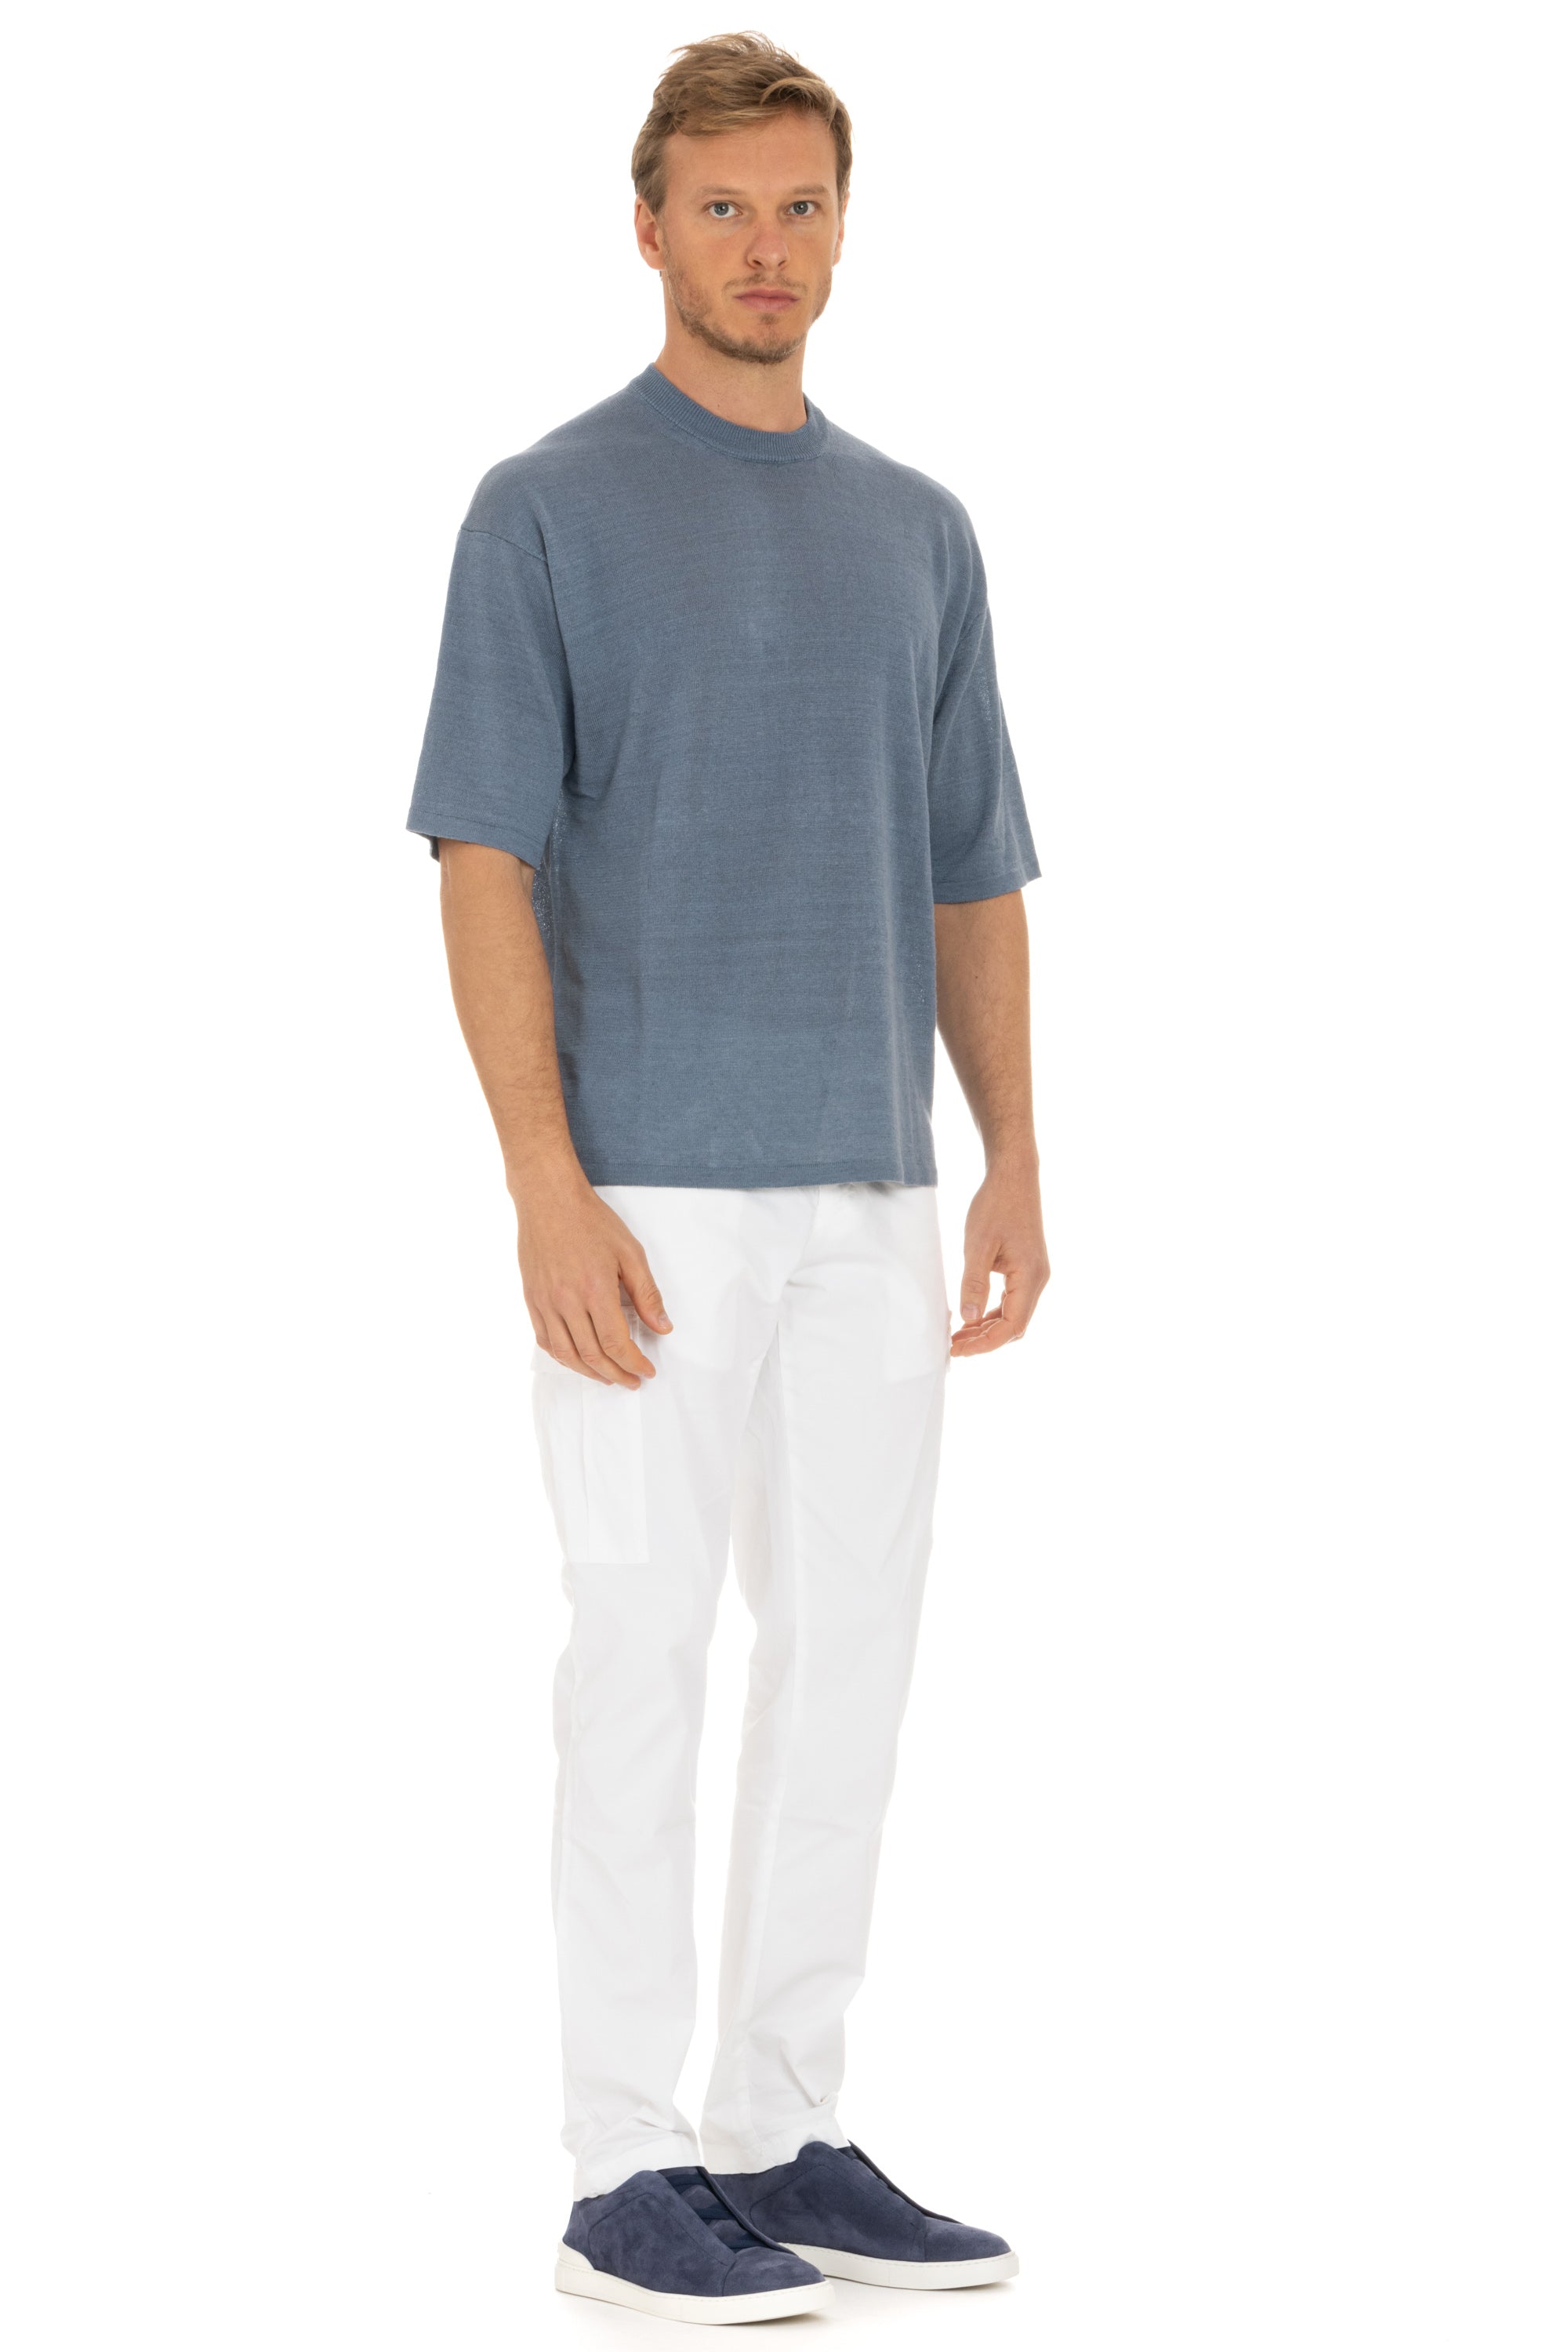 Over-fit pure linen T-shirt